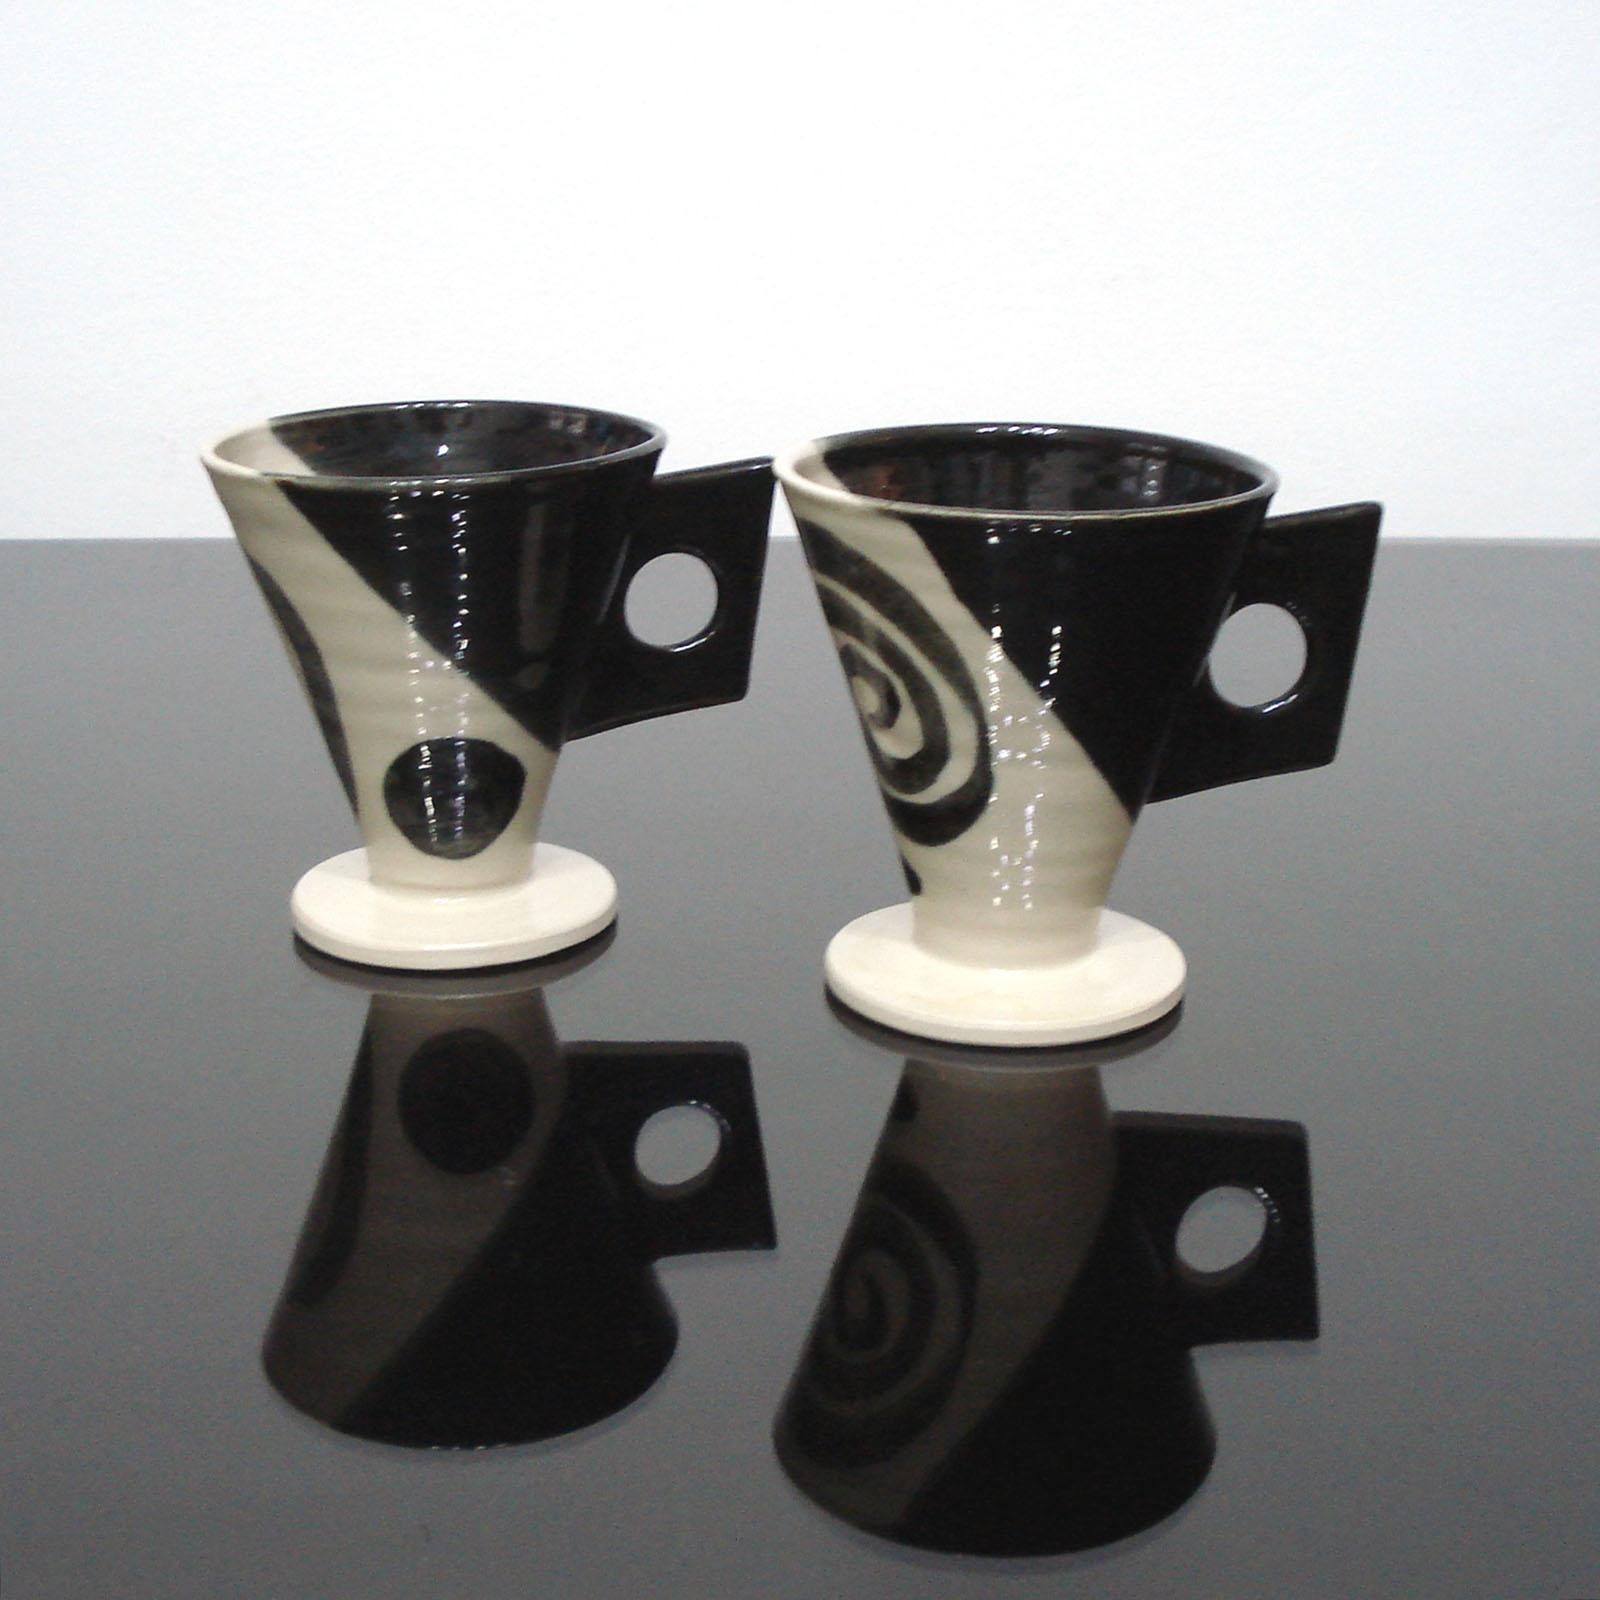 Gorgeous pair of ceramic mugs designed by the Swedish artist Margot Öjemark.
Black and cream are the two colors that form the exquisite glaze that covers the pair.
The modern and friendly shape as well the associated colors in decent tones are